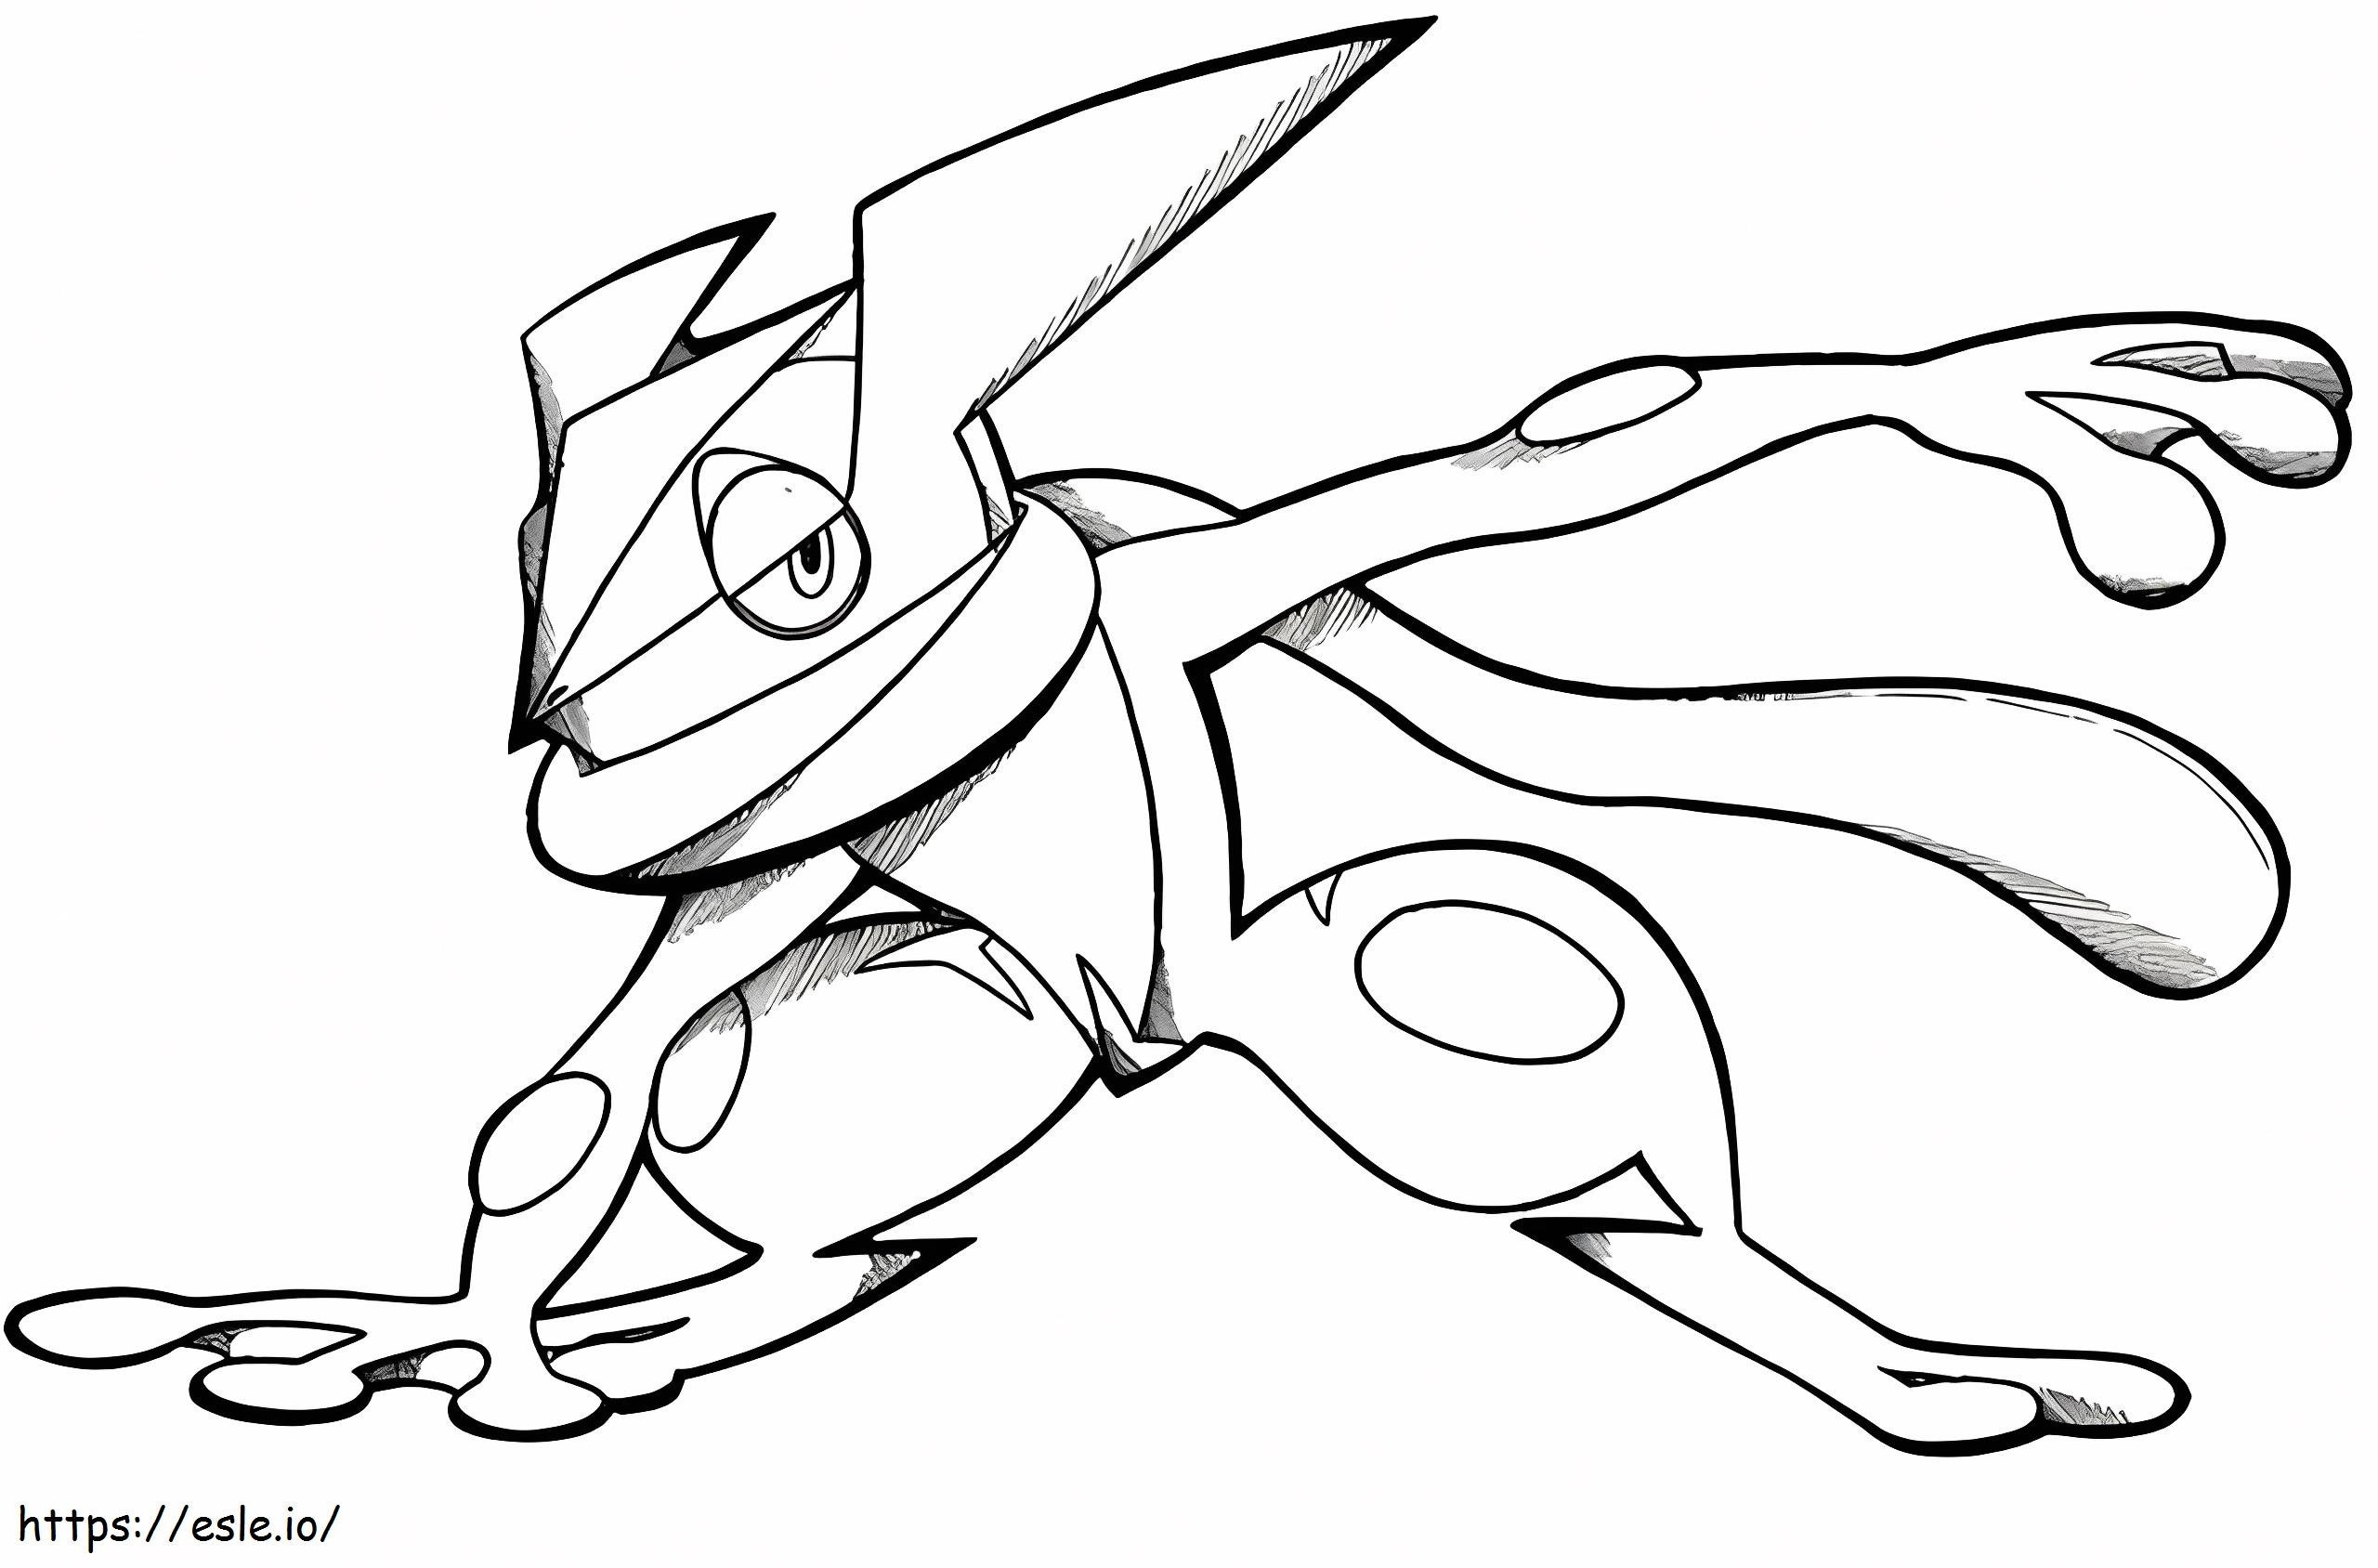 Coldly Greninja coloring page